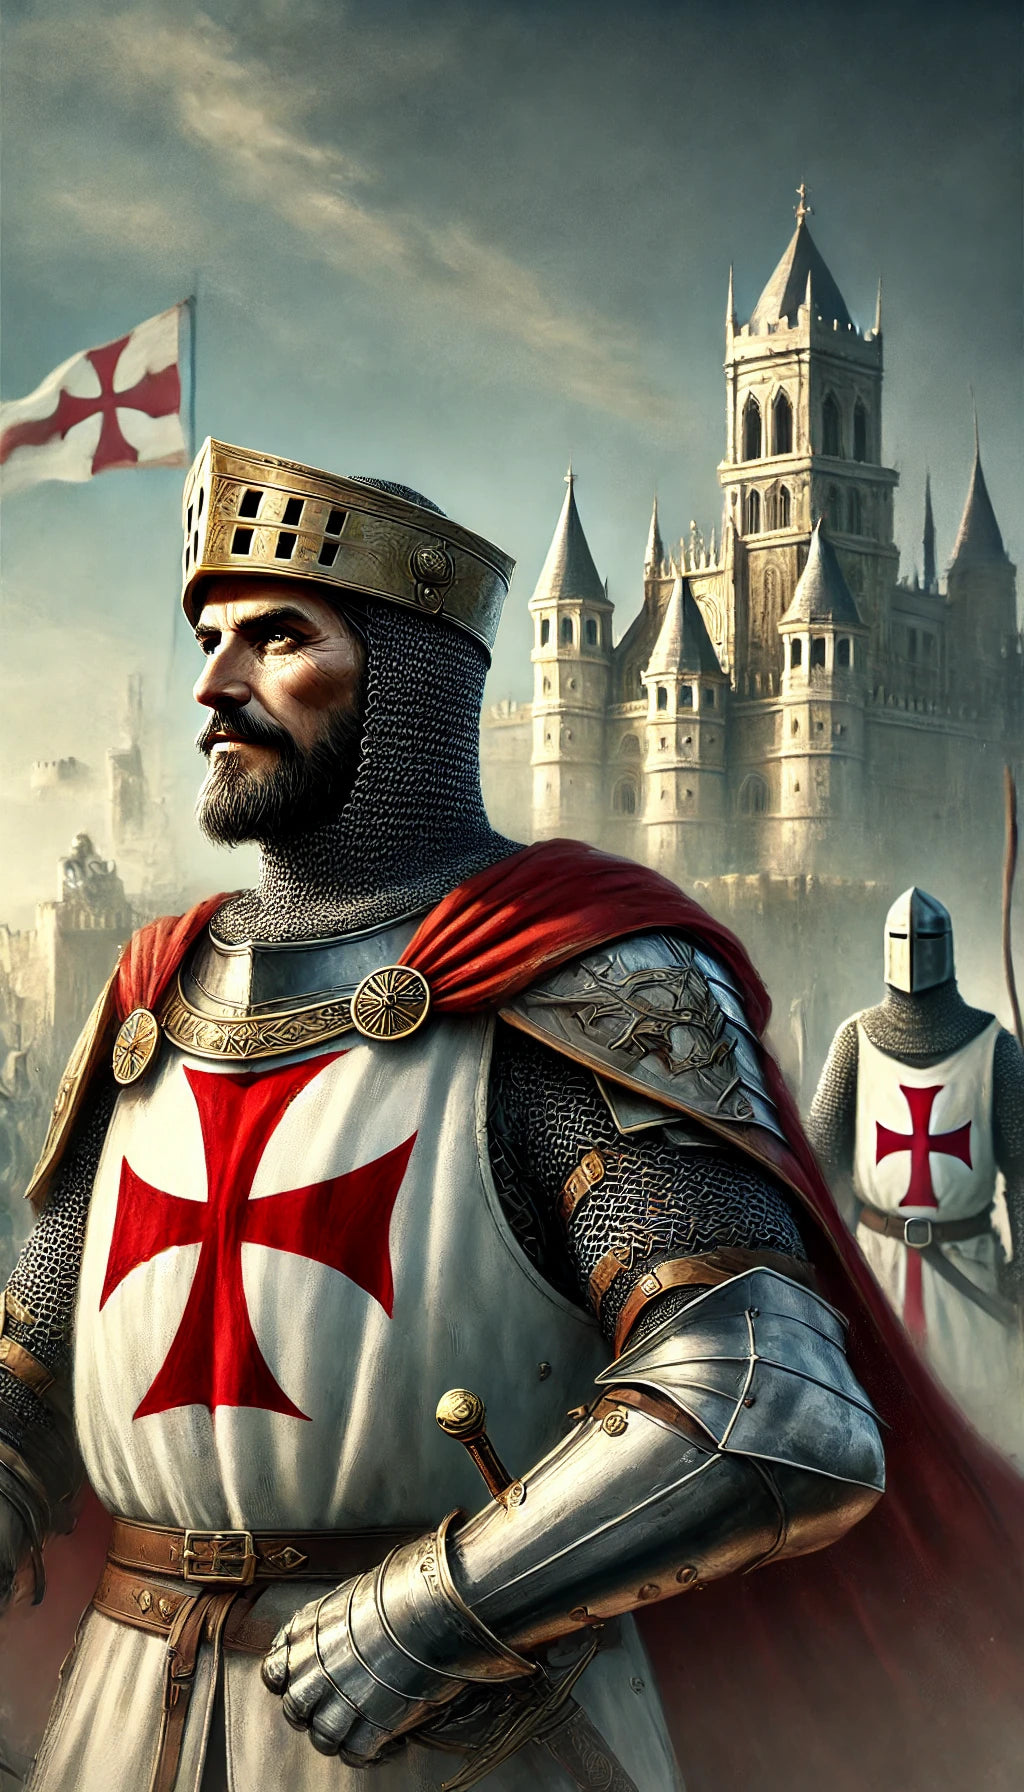 The Knights Templar's Related Organizations: A Journey Through History